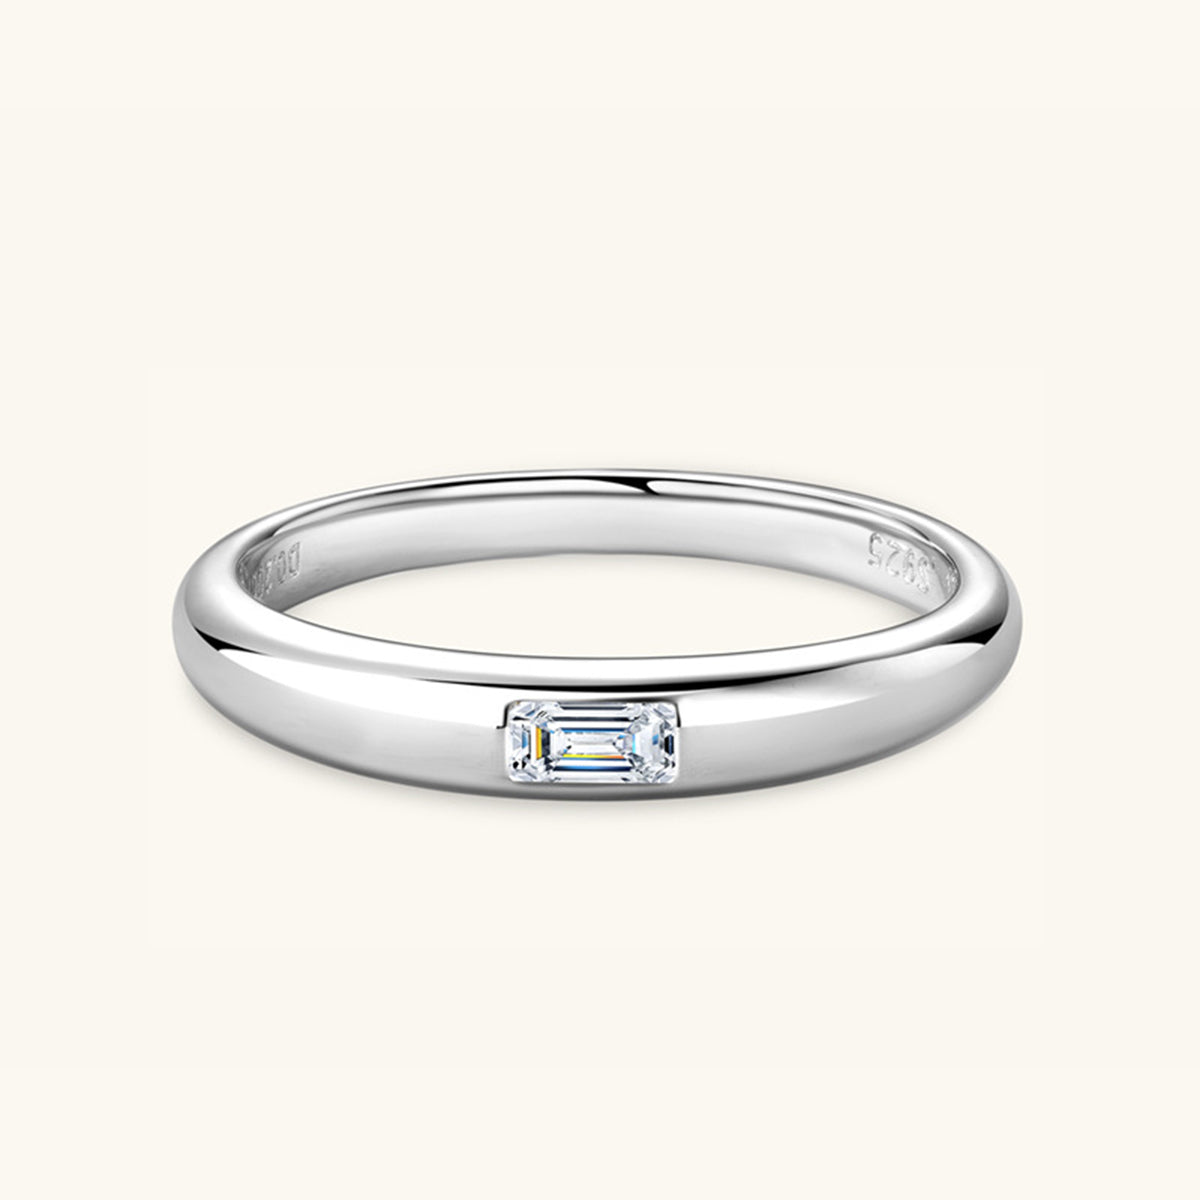 Less Is More 925 Sterling Silver Inlaid Moissanite Ring